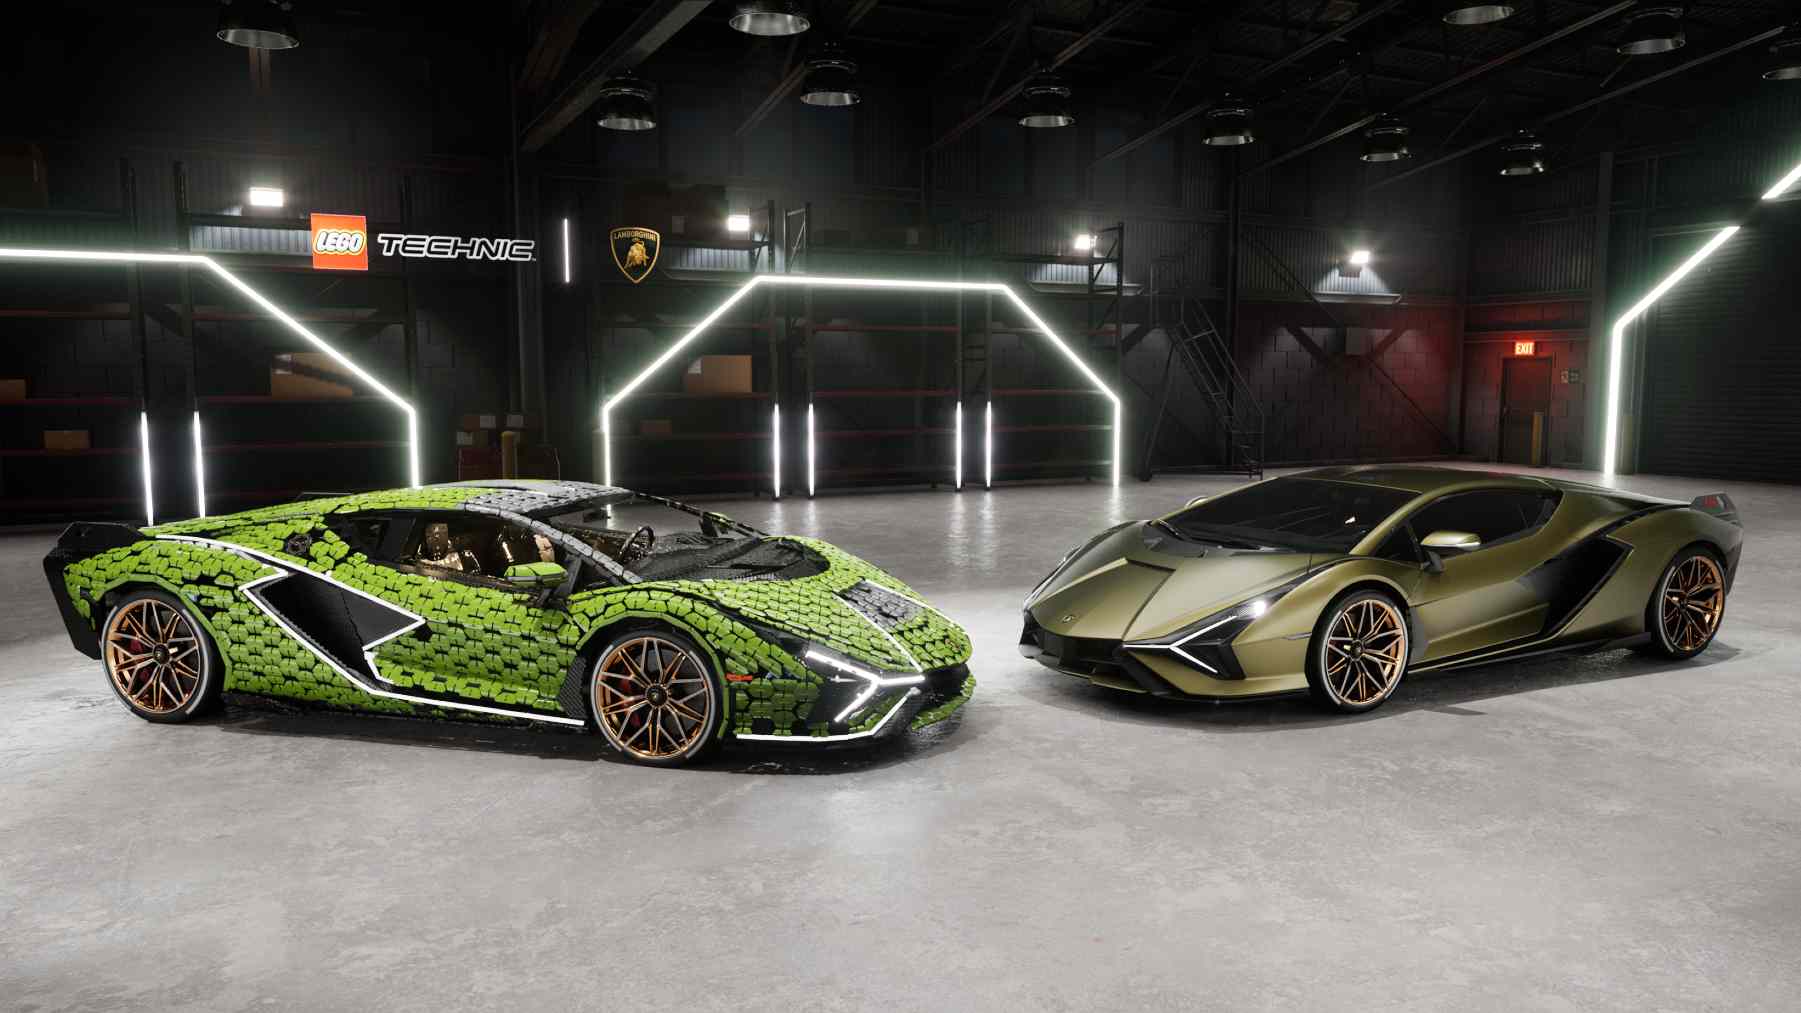 You are currently viewing Lego and Lamborghini come together to create life-size Lamborghini Sian FKP 37 replica- Technology News, FP